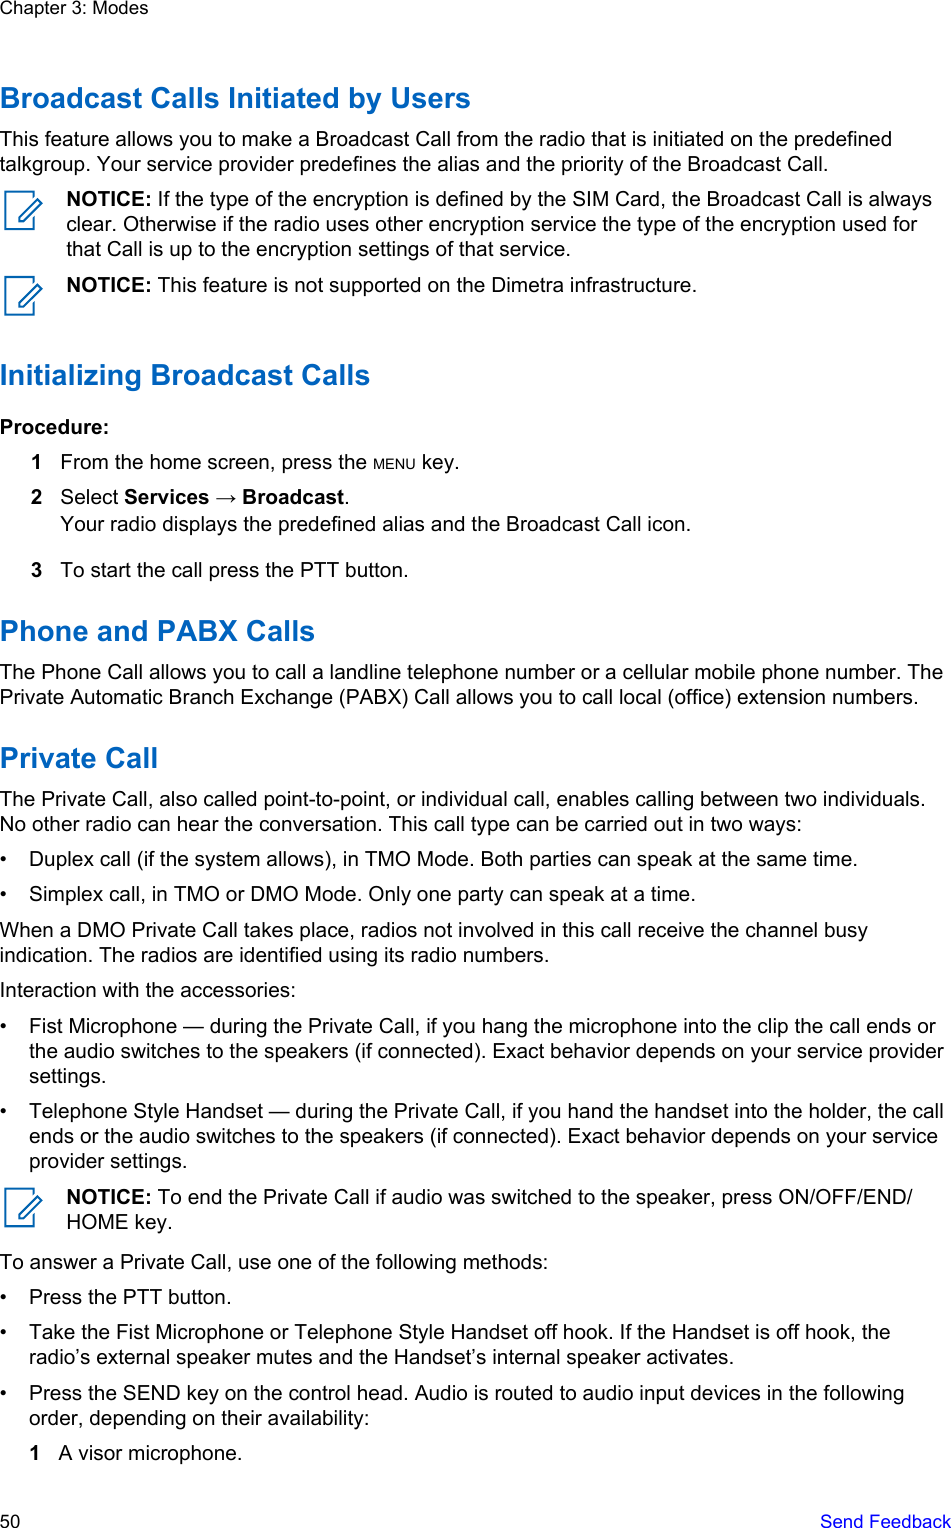 Broadcast Calls Initiated by UsersThis feature allows you to make a Broadcast Call from the radio that is initiated on the predefinedtalkgroup. Your service provider predefines the alias and the priority of the Broadcast Call.NOTICE: If the type of the encryption is defined by the SIM Card, the Broadcast Call is alwaysclear. Otherwise if the radio uses other encryption service the type of the encryption used forthat Call is up to the encryption settings of that service.NOTICE: This feature is not supported on the Dimetra infrastructure.Initializing Broadcast CallsProcedure:1From the home screen, press the MENU key.2Select Services → Broadcast.Your radio displays the predefined alias and the Broadcast Call icon.3To start the call press the PTT button.Phone and PABX CallsThe Phone Call allows you to call a landline telephone number or a cellular mobile phone number. ThePrivate Automatic Branch Exchange (PABX) Call allows you to call local (office) extension numbers.Private CallThe Private Call, also called point-to-point, or individual call, enables calling between two individuals.No other radio can hear the conversation. This call type can be carried out in two ways:• Duplex call (if the system allows), in TMO Mode. Both parties can speak at the same time.• Simplex call, in TMO or DMO Mode. Only one party can speak at a time.When a DMO Private Call takes place, radios not involved in this call receive the channel busyindication. The radios are identified using its radio numbers.Interaction with the accessories:• Fist Microphone — during the Private Call, if you hang the microphone into the clip the call ends orthe audio switches to the speakers (if connected). Exact behavior depends on your service providersettings.• Telephone Style Handset — during the Private Call, if you hand the handset into the holder, the callends or the audio switches to the speakers (if connected). Exact behavior depends on your serviceprovider settings.NOTICE: To end the Private Call if audio was switched to the speaker, press ON/OFF/END/HOME key.To answer a Private Call, use one of the following methods:• Press the PTT button.• Take the Fist Microphone or Telephone Style Handset off hook. If the Handset is off hook, theradio’s external speaker mutes and the Handset’s internal speaker activates.• Press the SEND key on the control head. Audio is routed to audio input devices in the followingorder, depending on their availability:1A visor microphone.Chapter 3: Modes50   Send Feedback